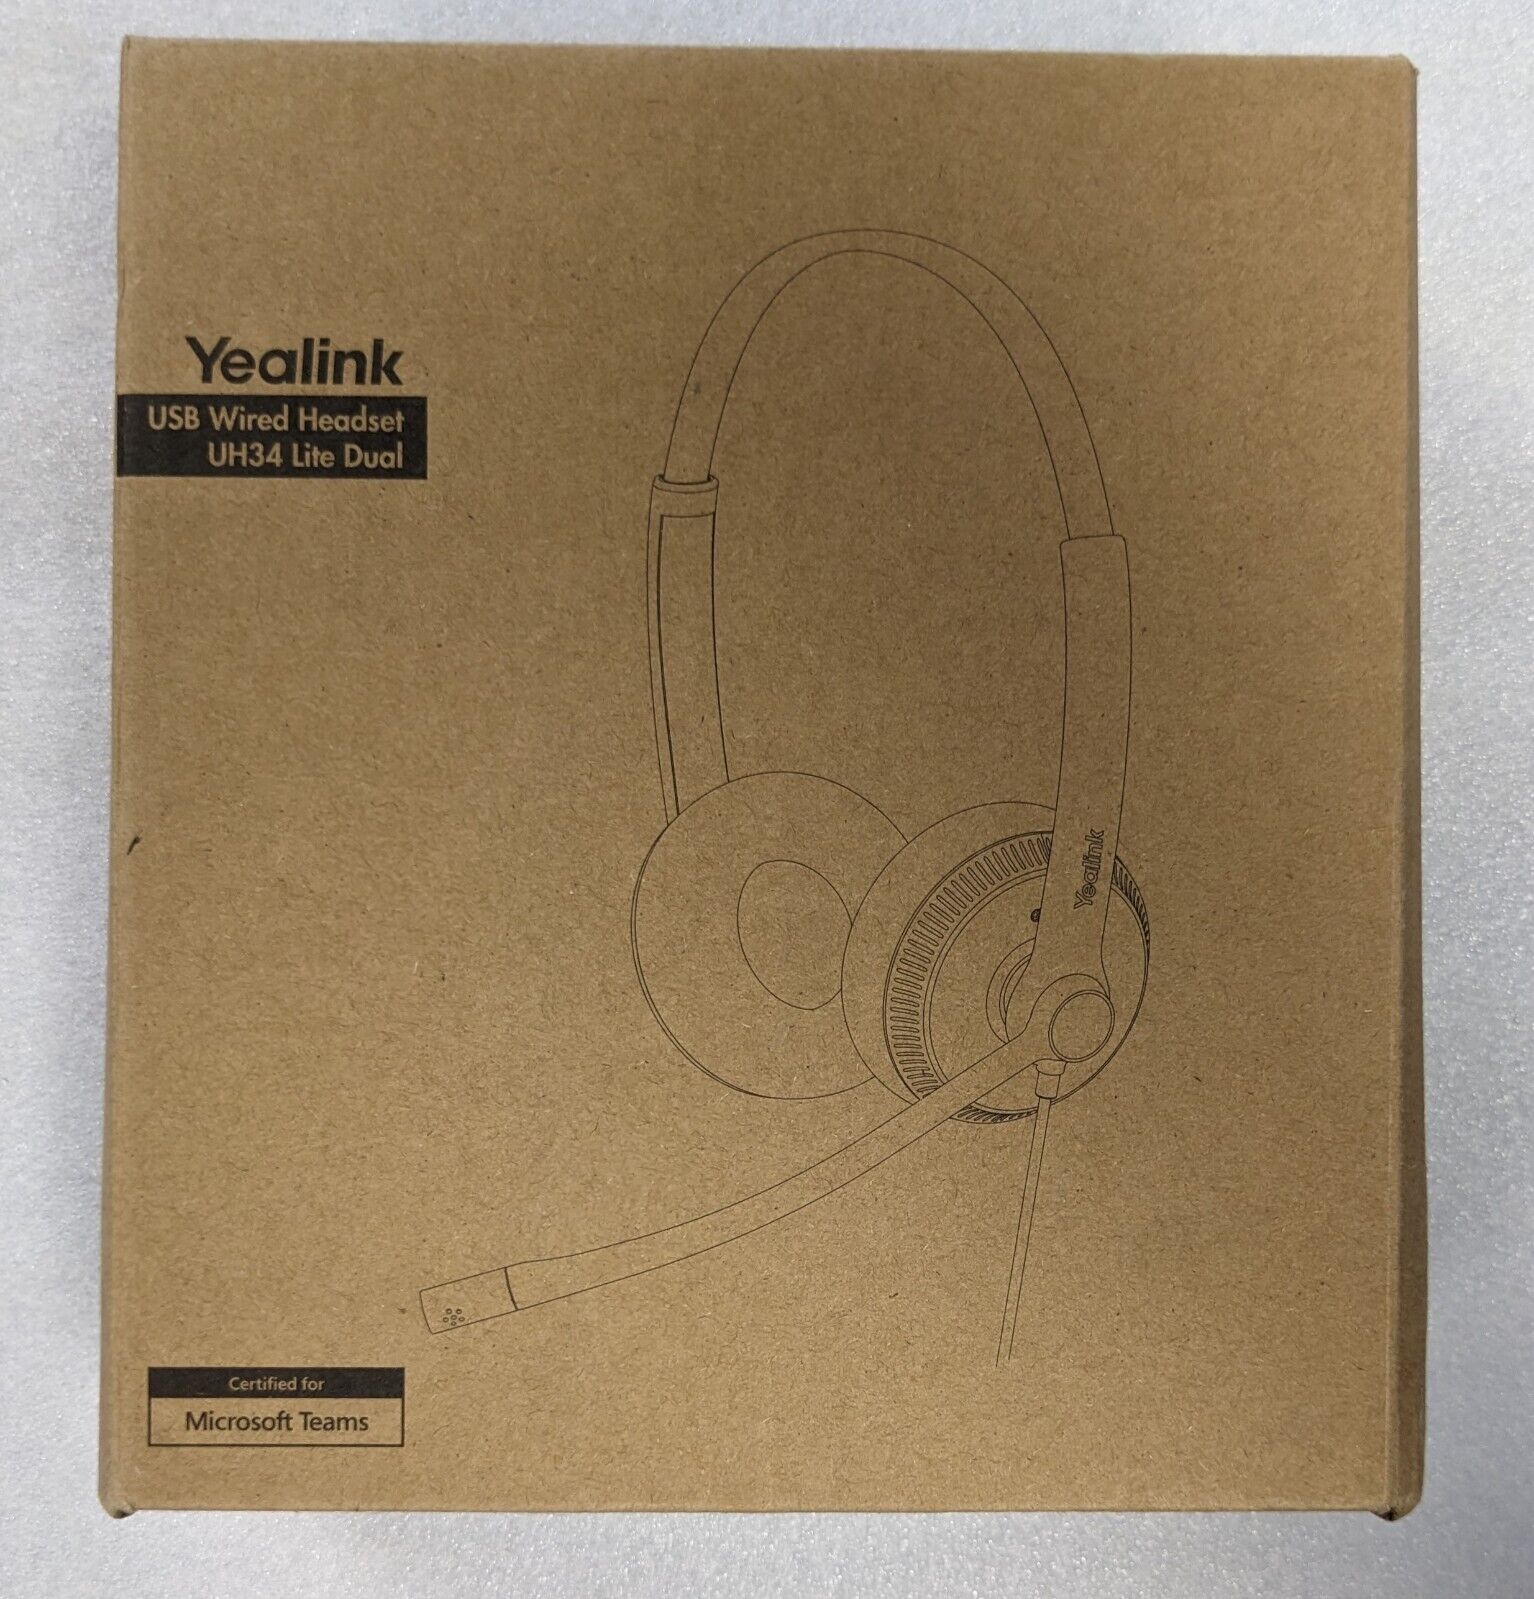 New Yealink UH34 Dual USB Wired Headset UH 34 Certified For Microsoft Teams